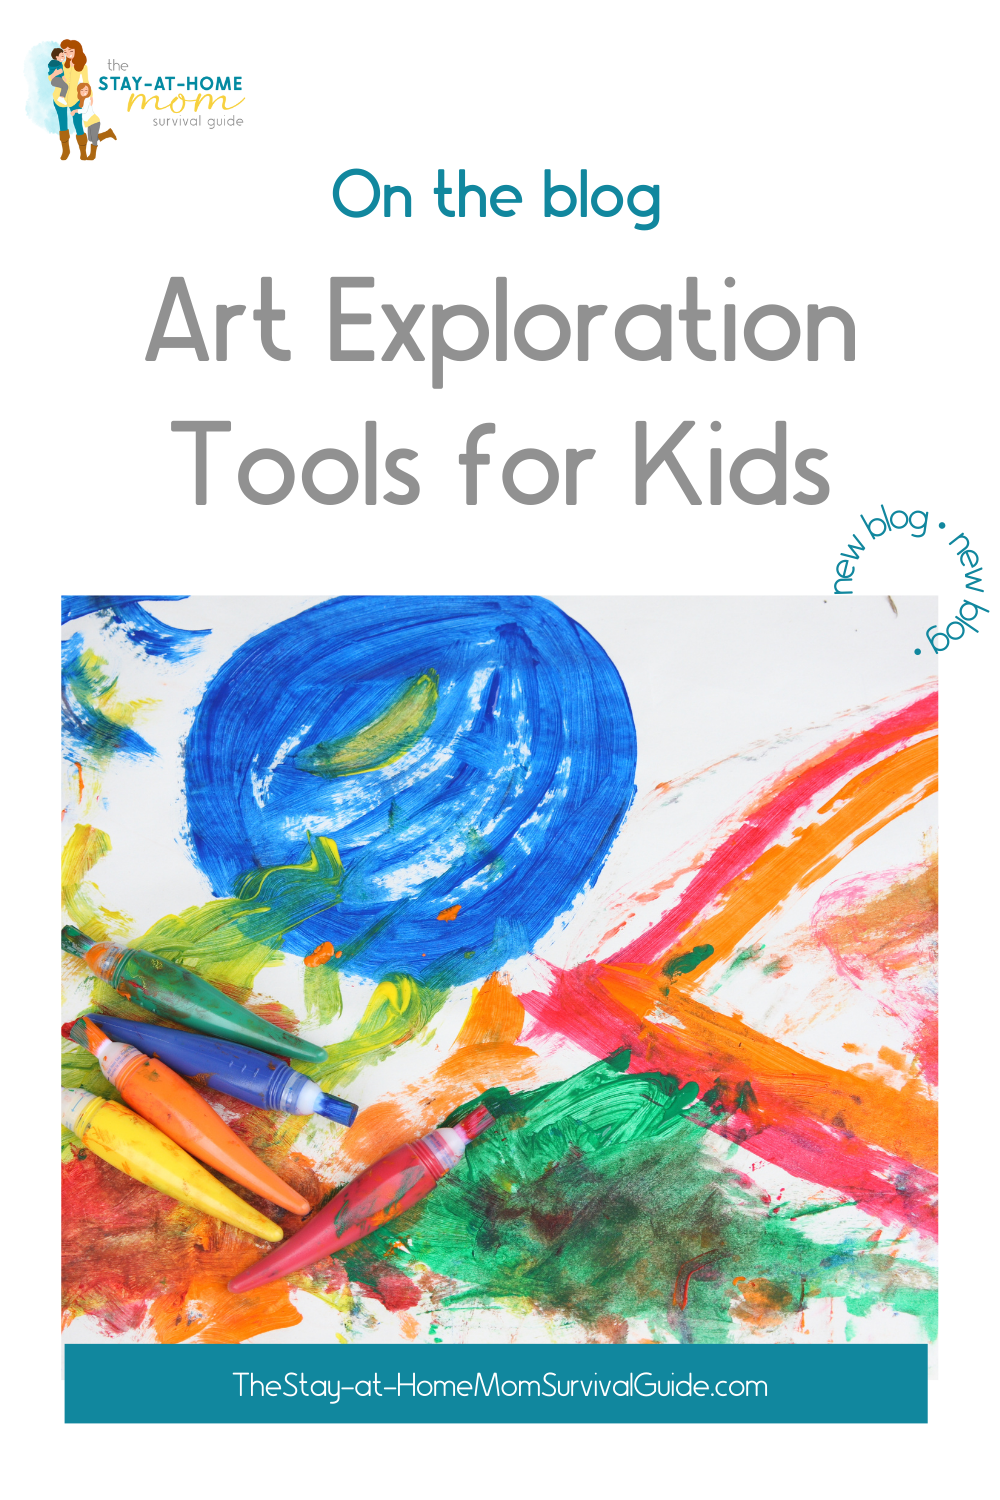 Art exploration tools for kids - inexpensive ways to explore art at home with kids.